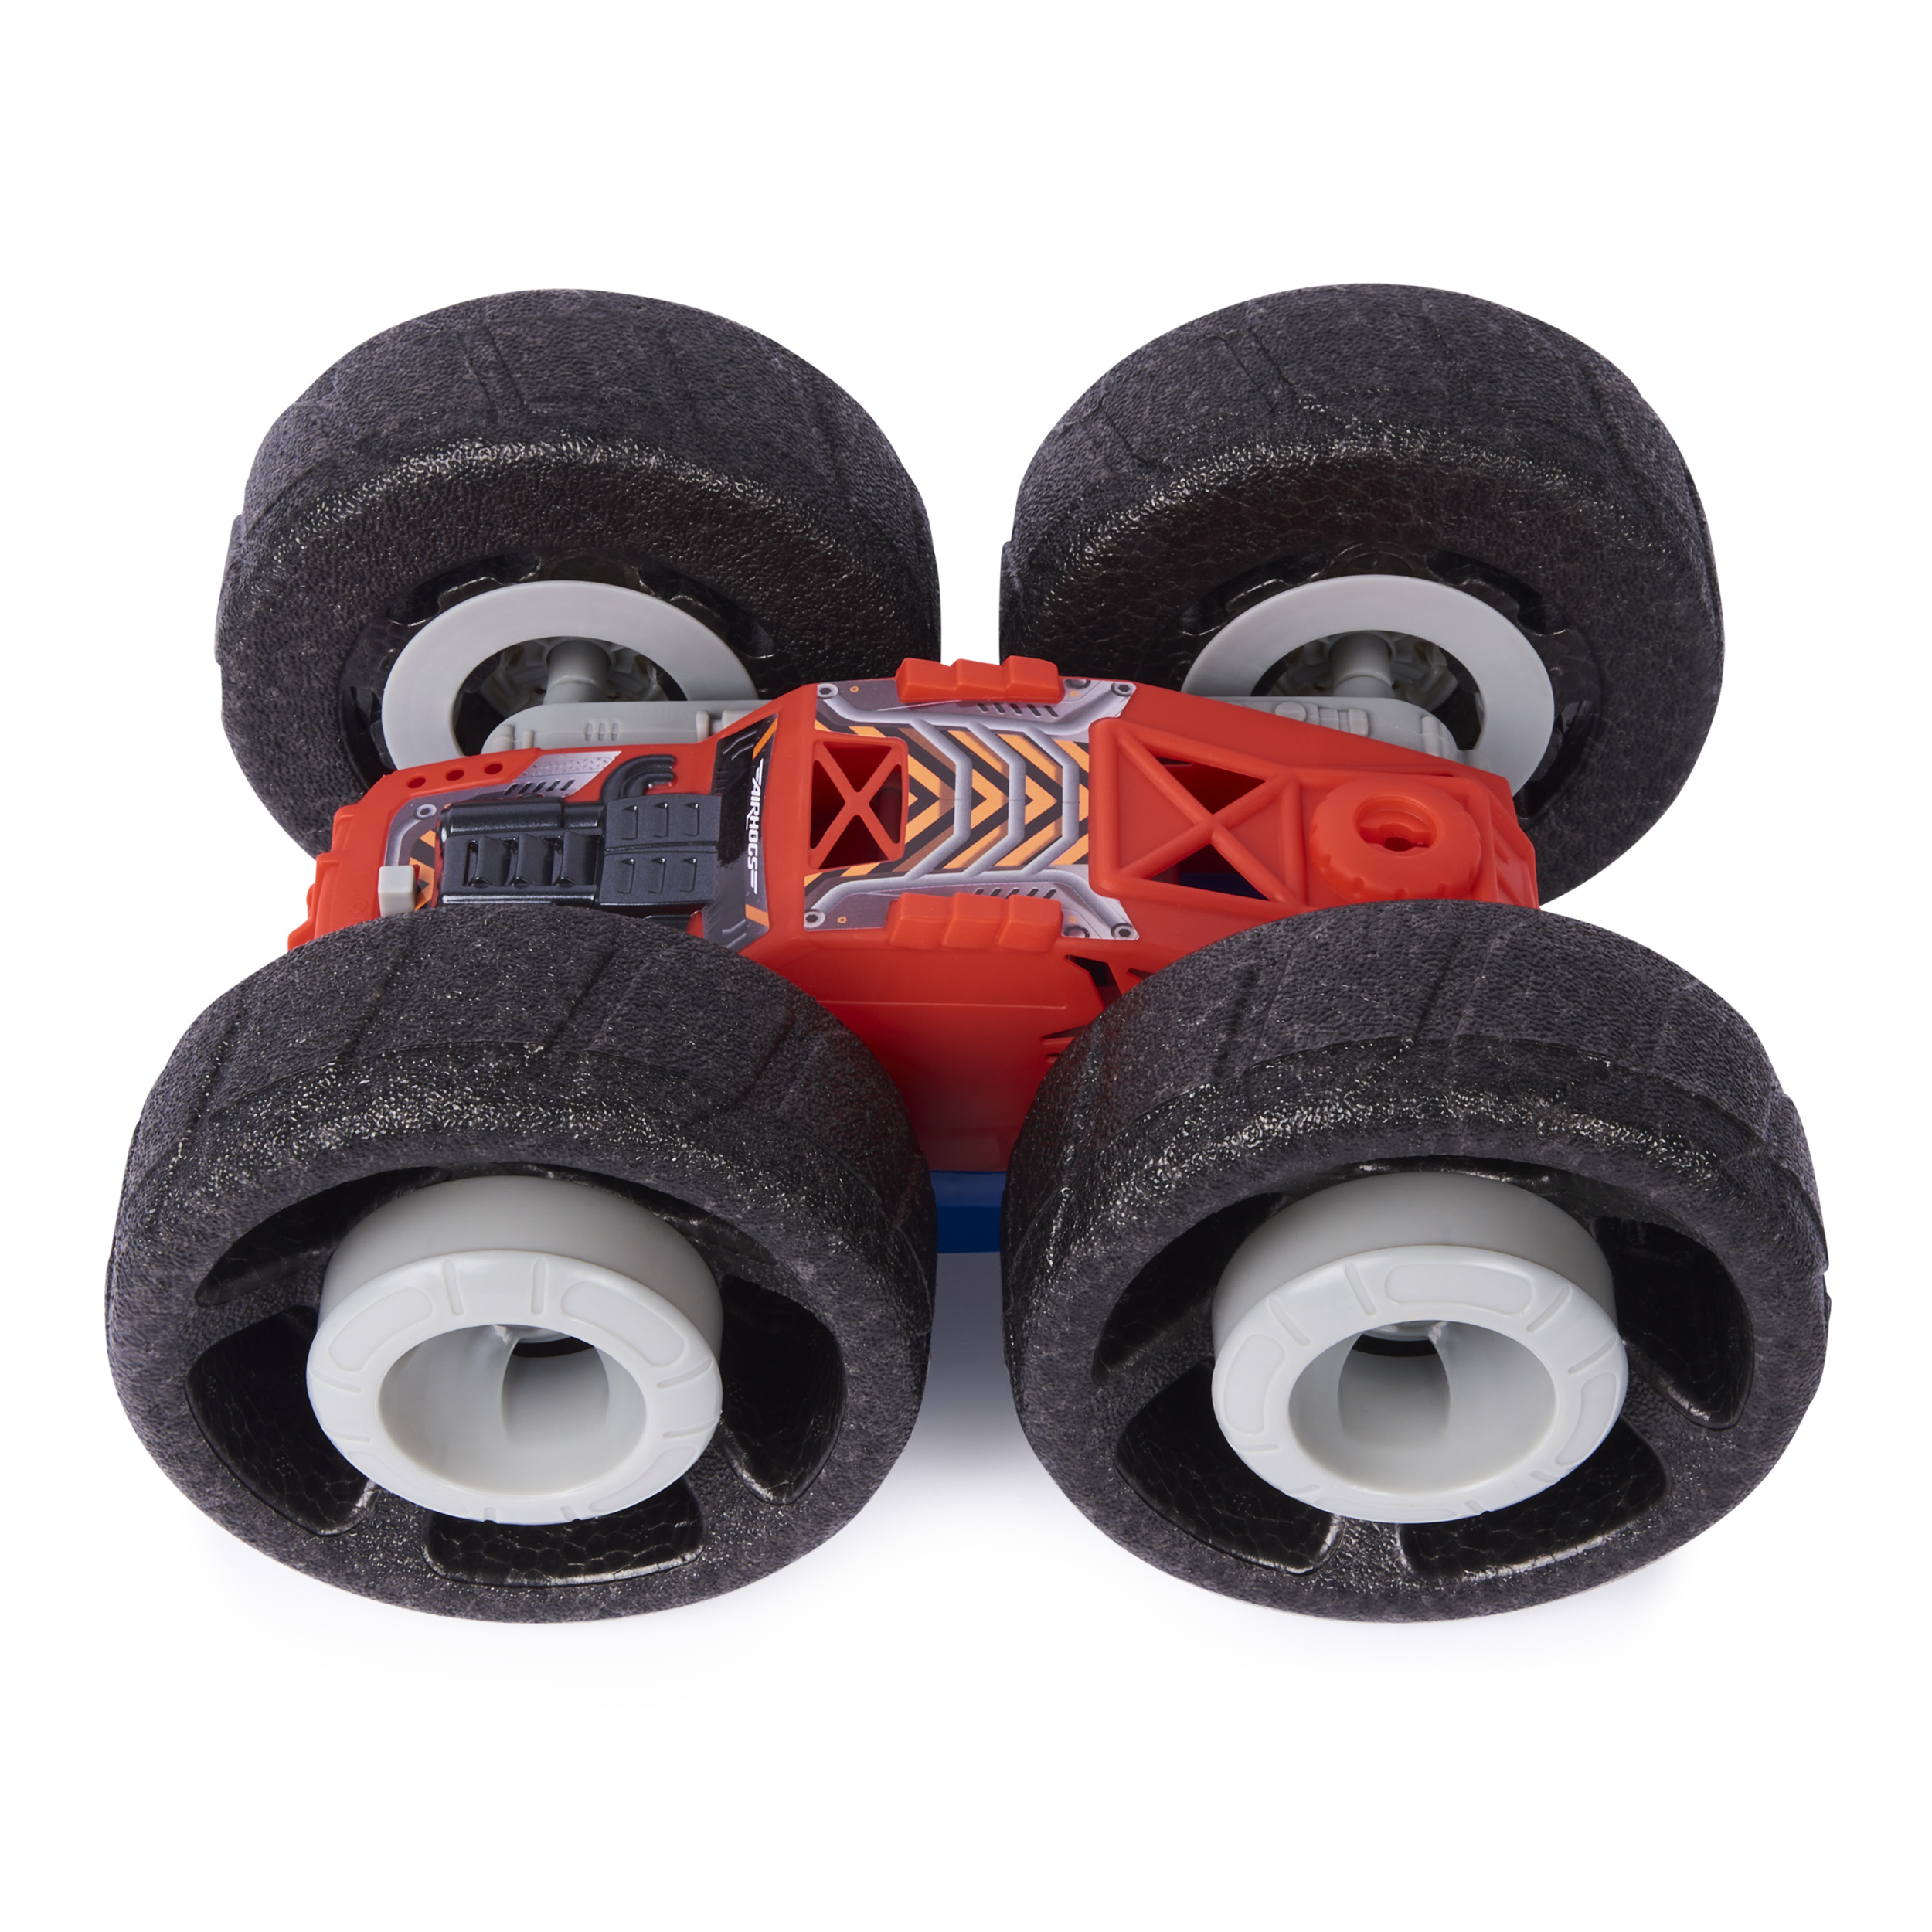 Air Hogs Super Soft, Flippin Frenzy 2-in-1 Stunt RC Vehicle - image 2 of 6